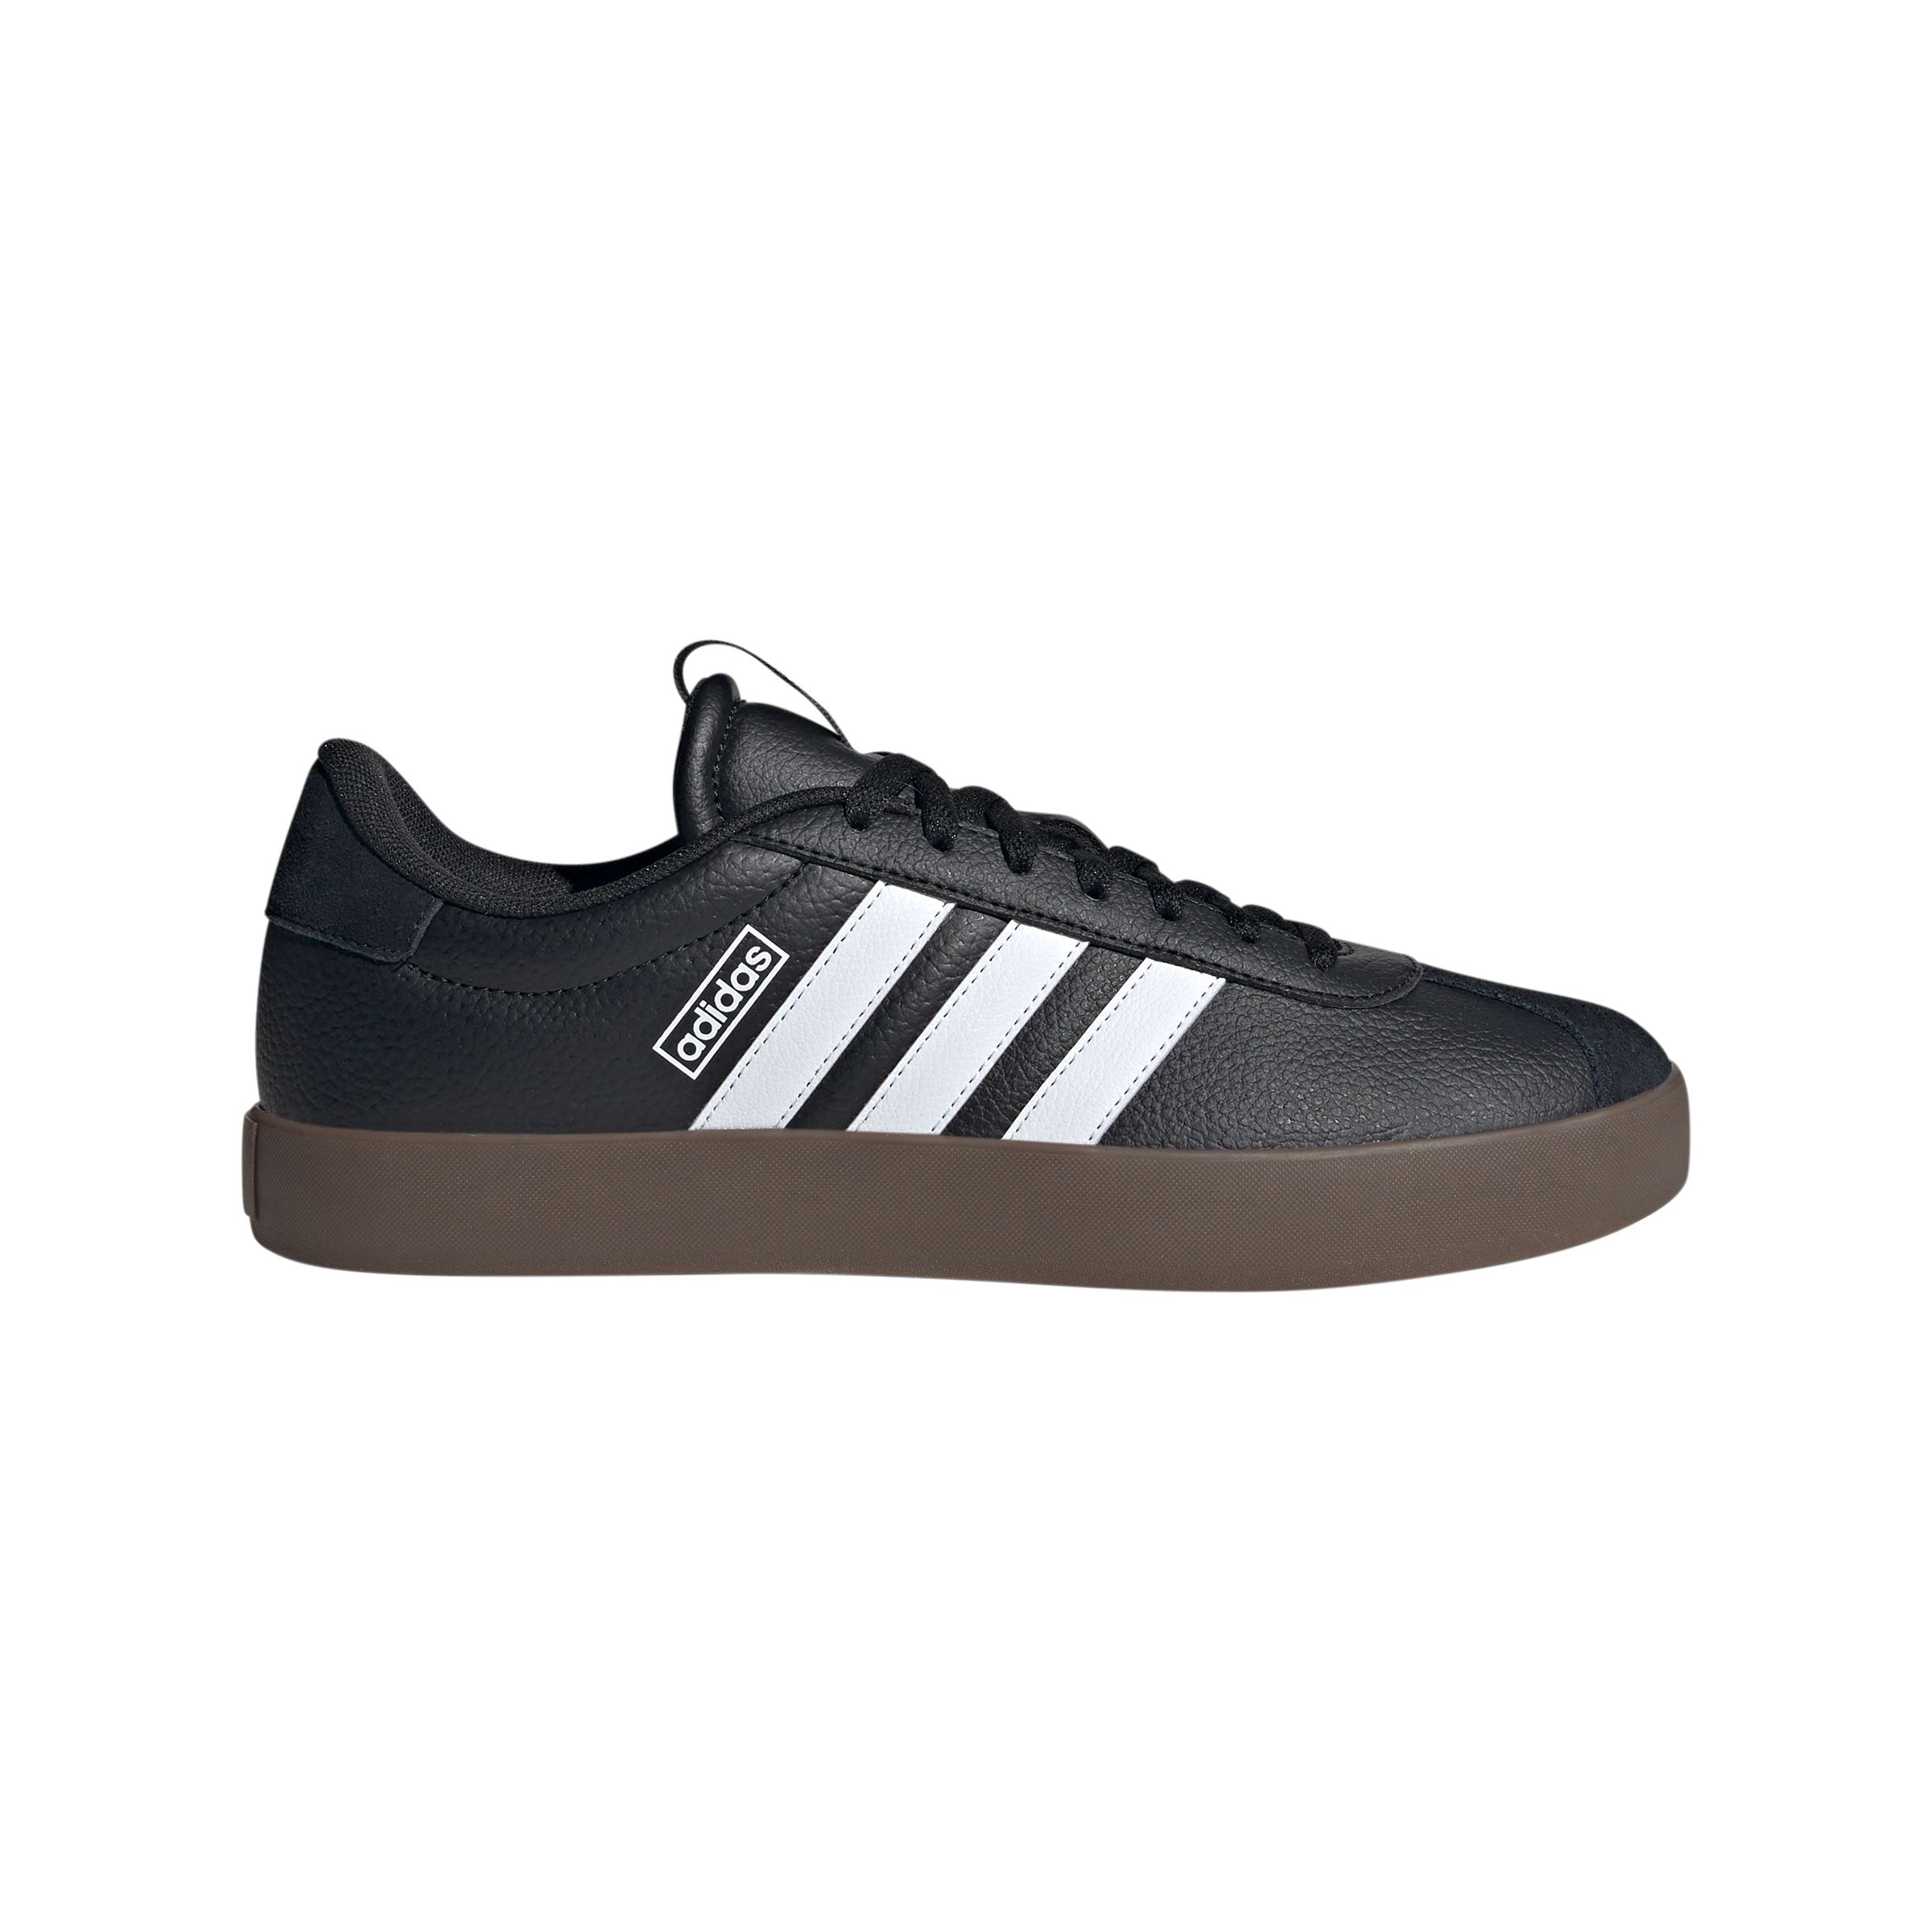 Image of adidas Men's VL Court 3.0 Shoes Sneakers